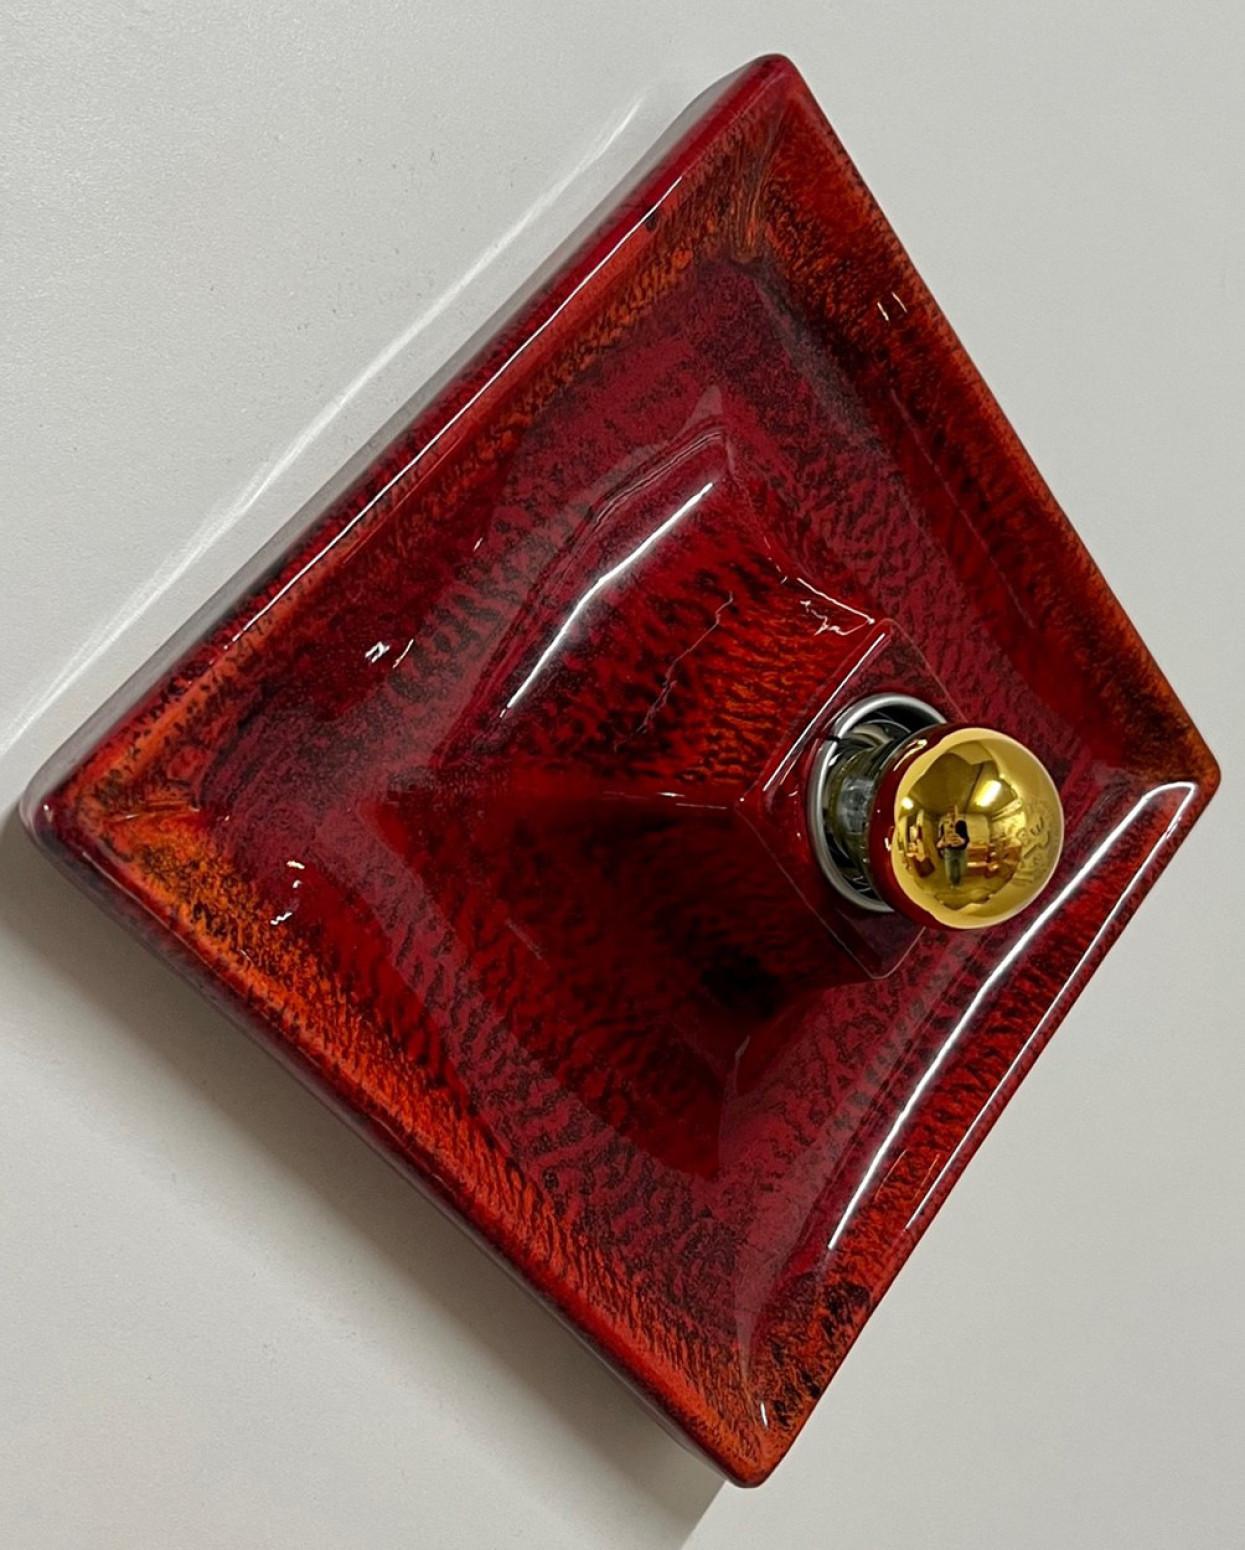 Red Square Ceramic Wall Lights by Hustadt Keramik, Germany, 1970 For Sale 8